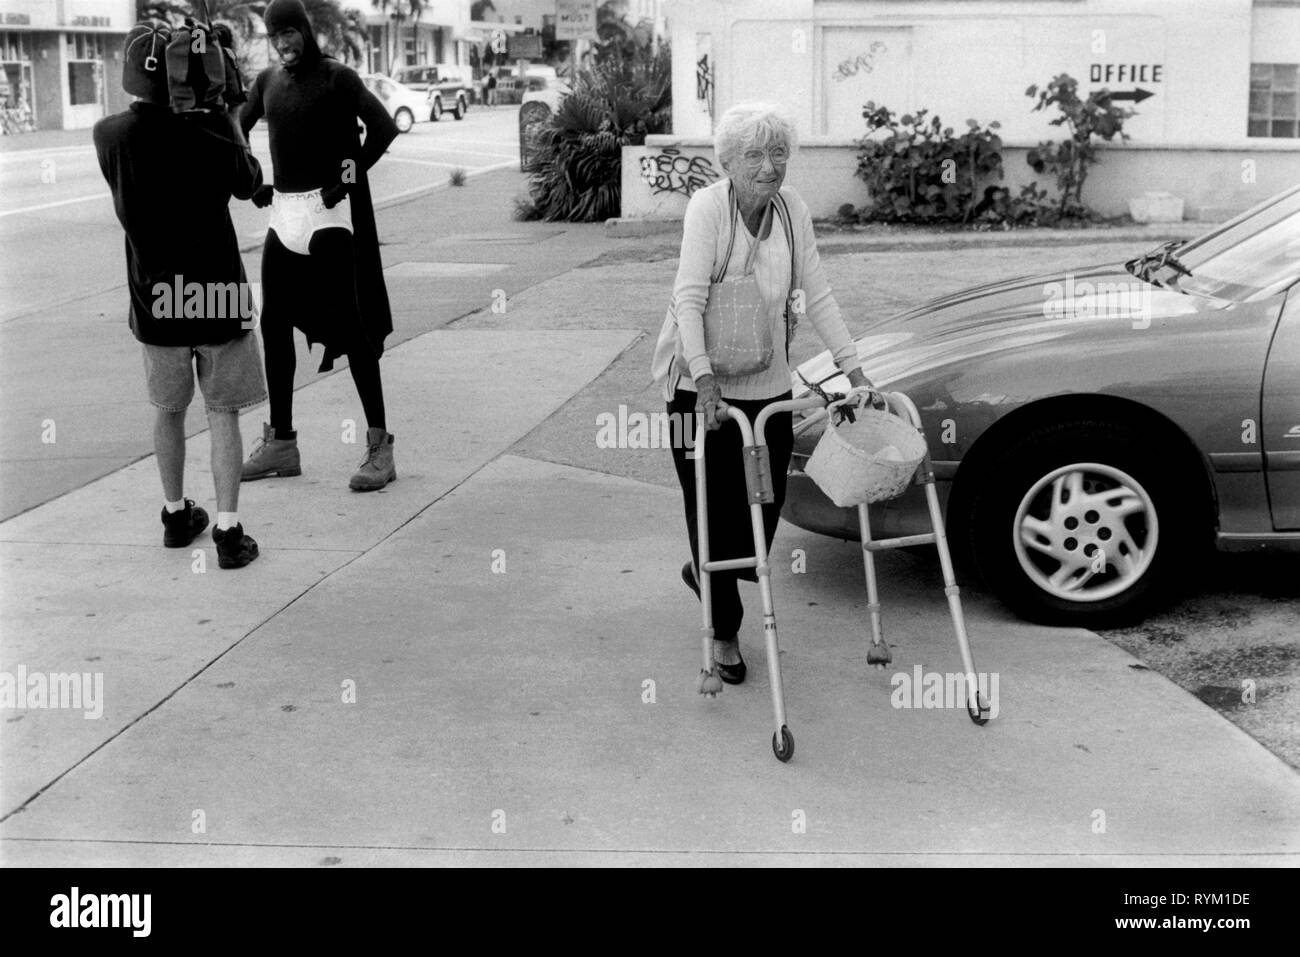 South Beach Miami, Florida USA 1999.  Old woman with zimmer frame walking past an Afro America man who is dressed as a super hero. He is wearing his under shorts over his black costume while being filmed. 1990s US HOMER SYKES. Stock Photo